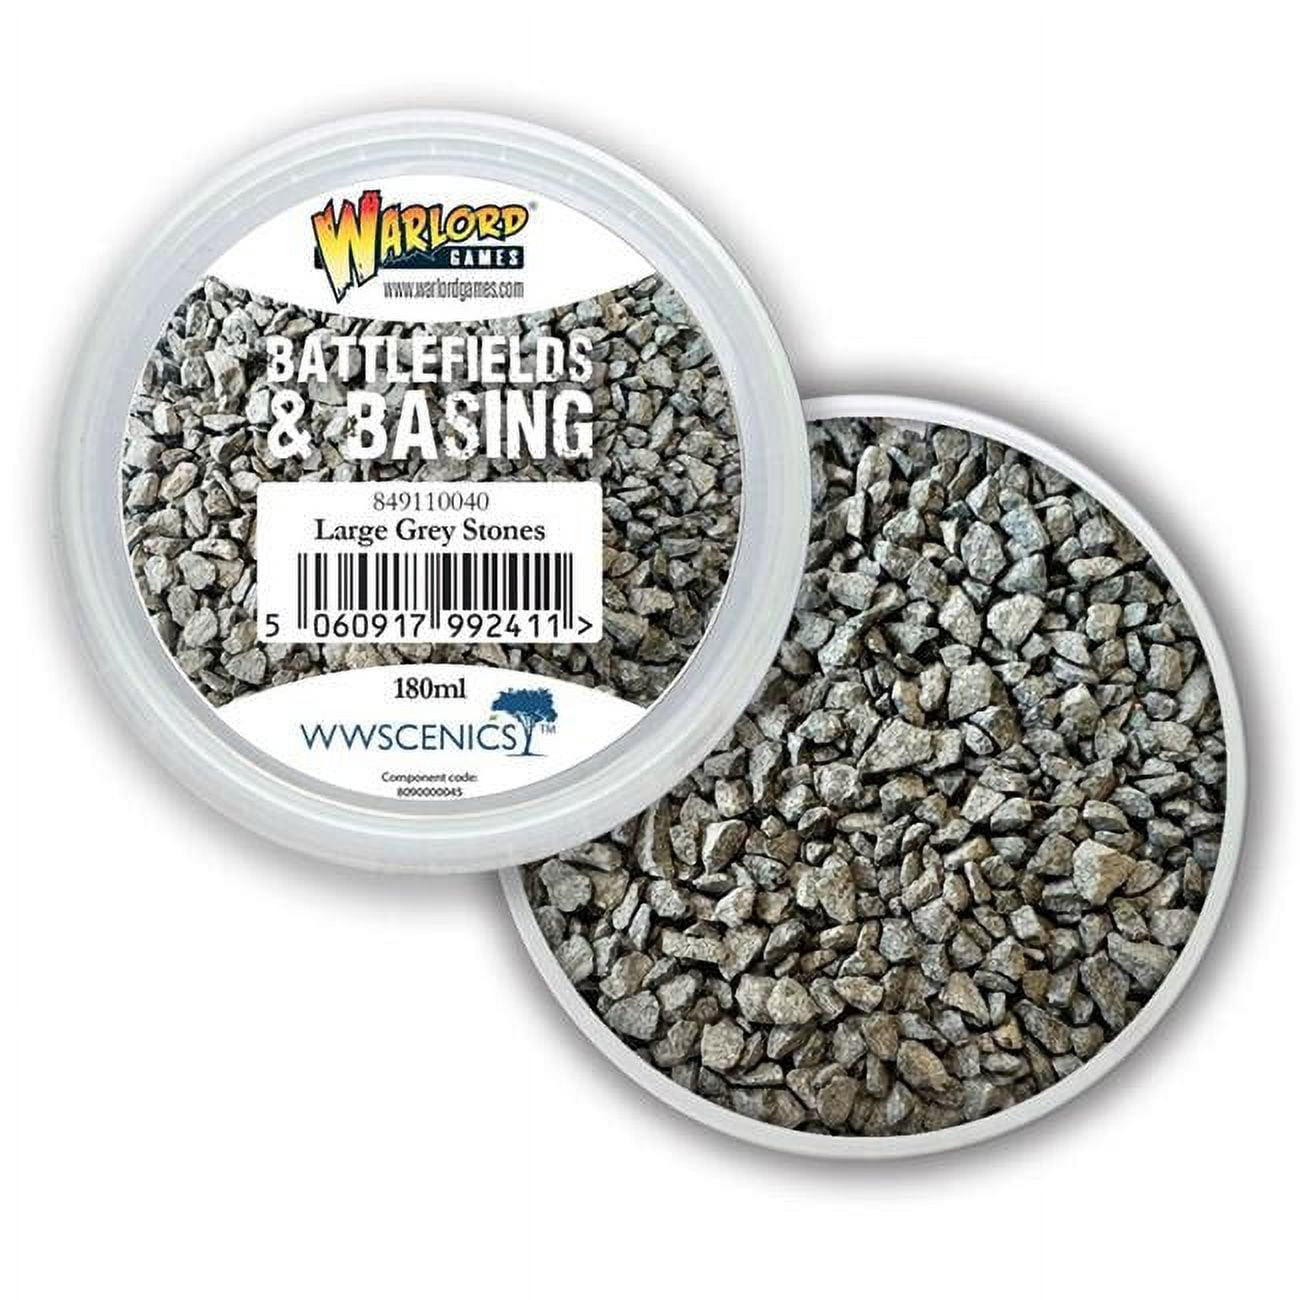 Picture of Warlord Games WRL849110040 180 ml Battlefields & Basing Large Grey Stones Miniature